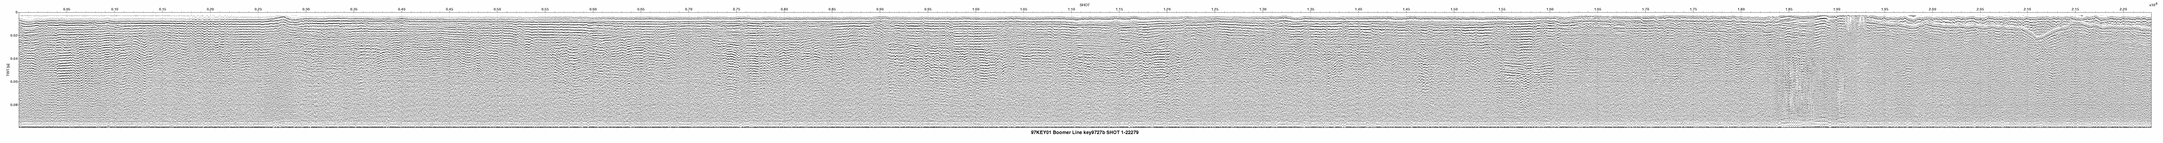 Thumbnail GIF image of the seismic trackline key9727b, with a hotlink to the more detailed, larger JPG image.